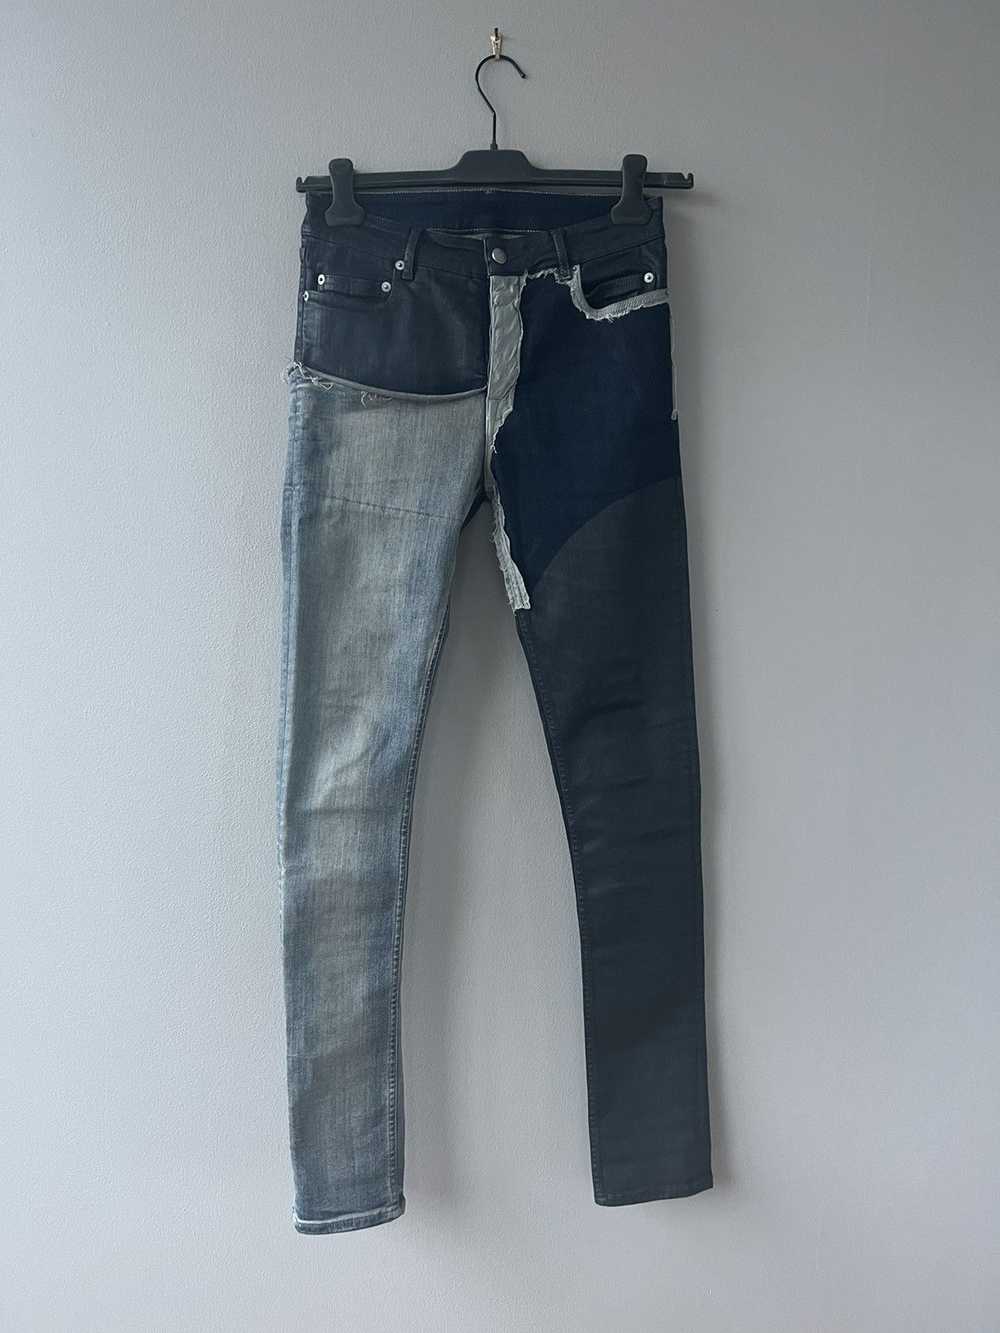 Rick Owens SS19 BABEL Combo Tyrone Jeans - image 1